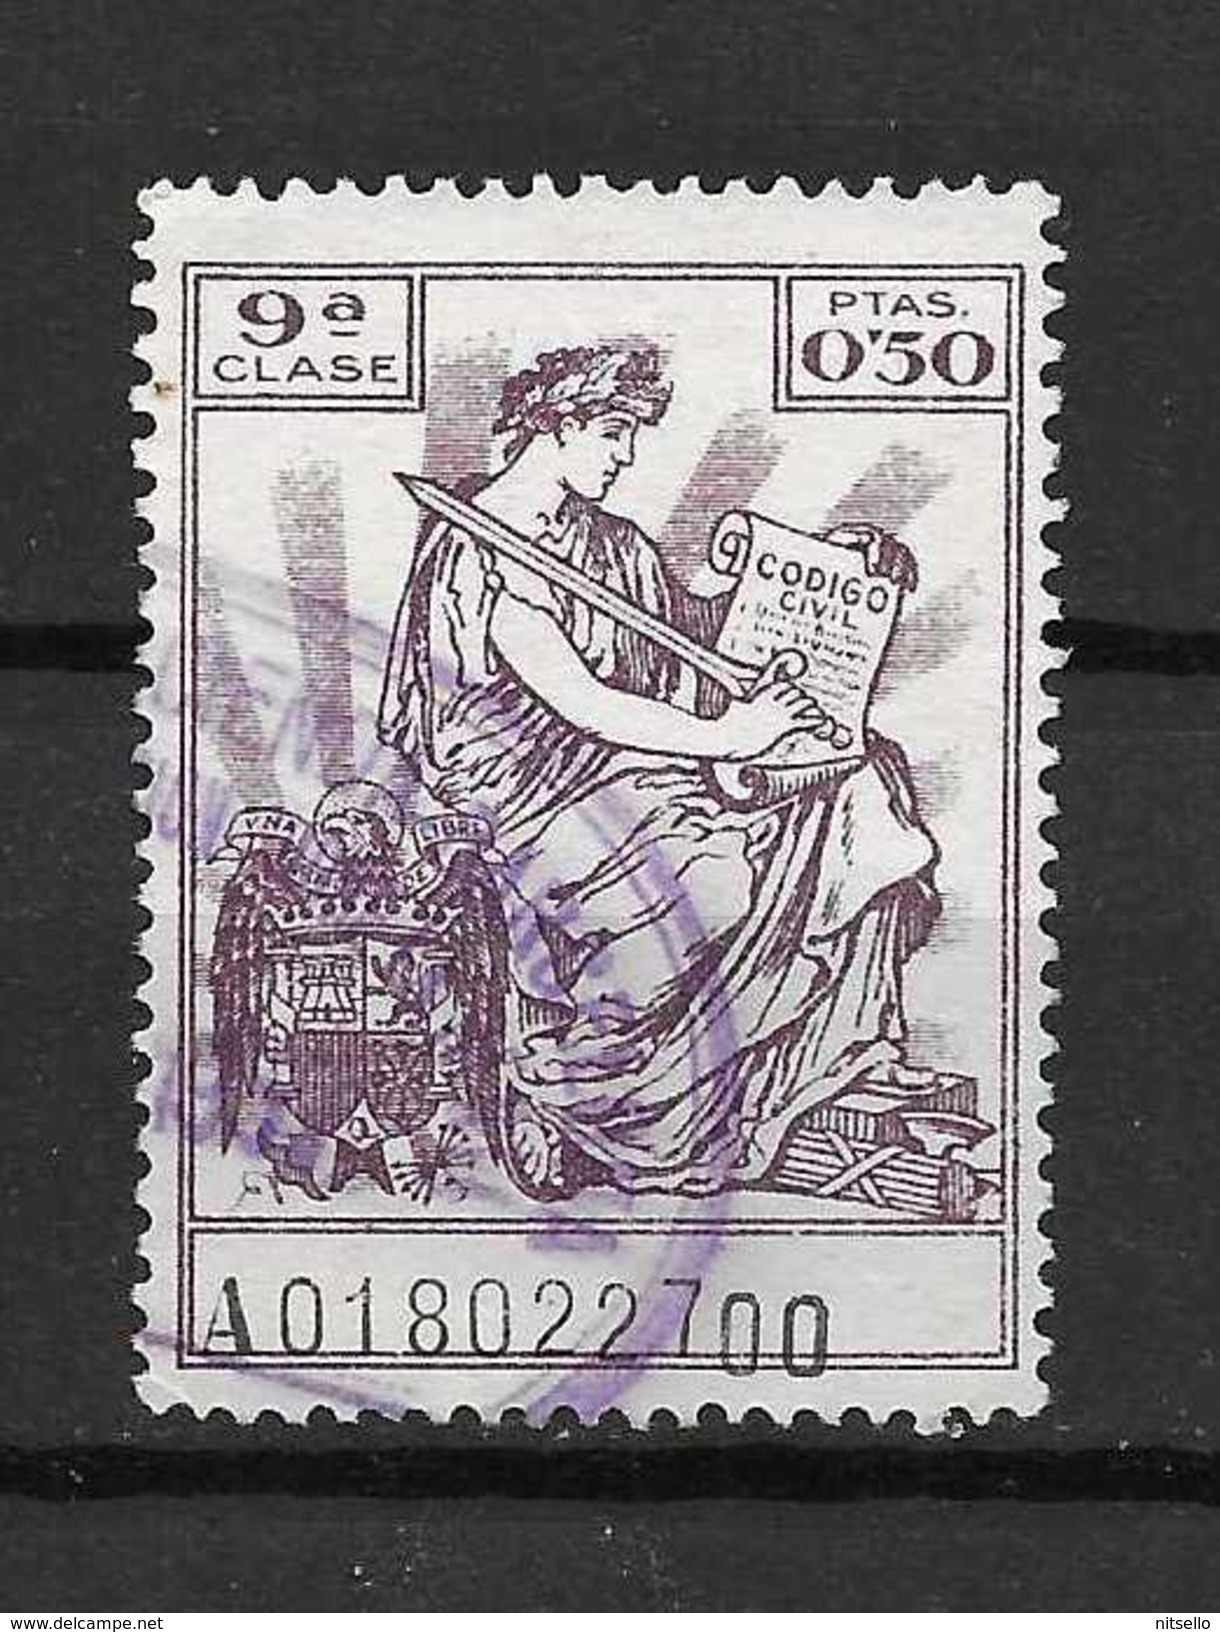 LOTE 1891 B   ///  ESPAÑA  FISCALES -   9ª CLASE - Fiscales